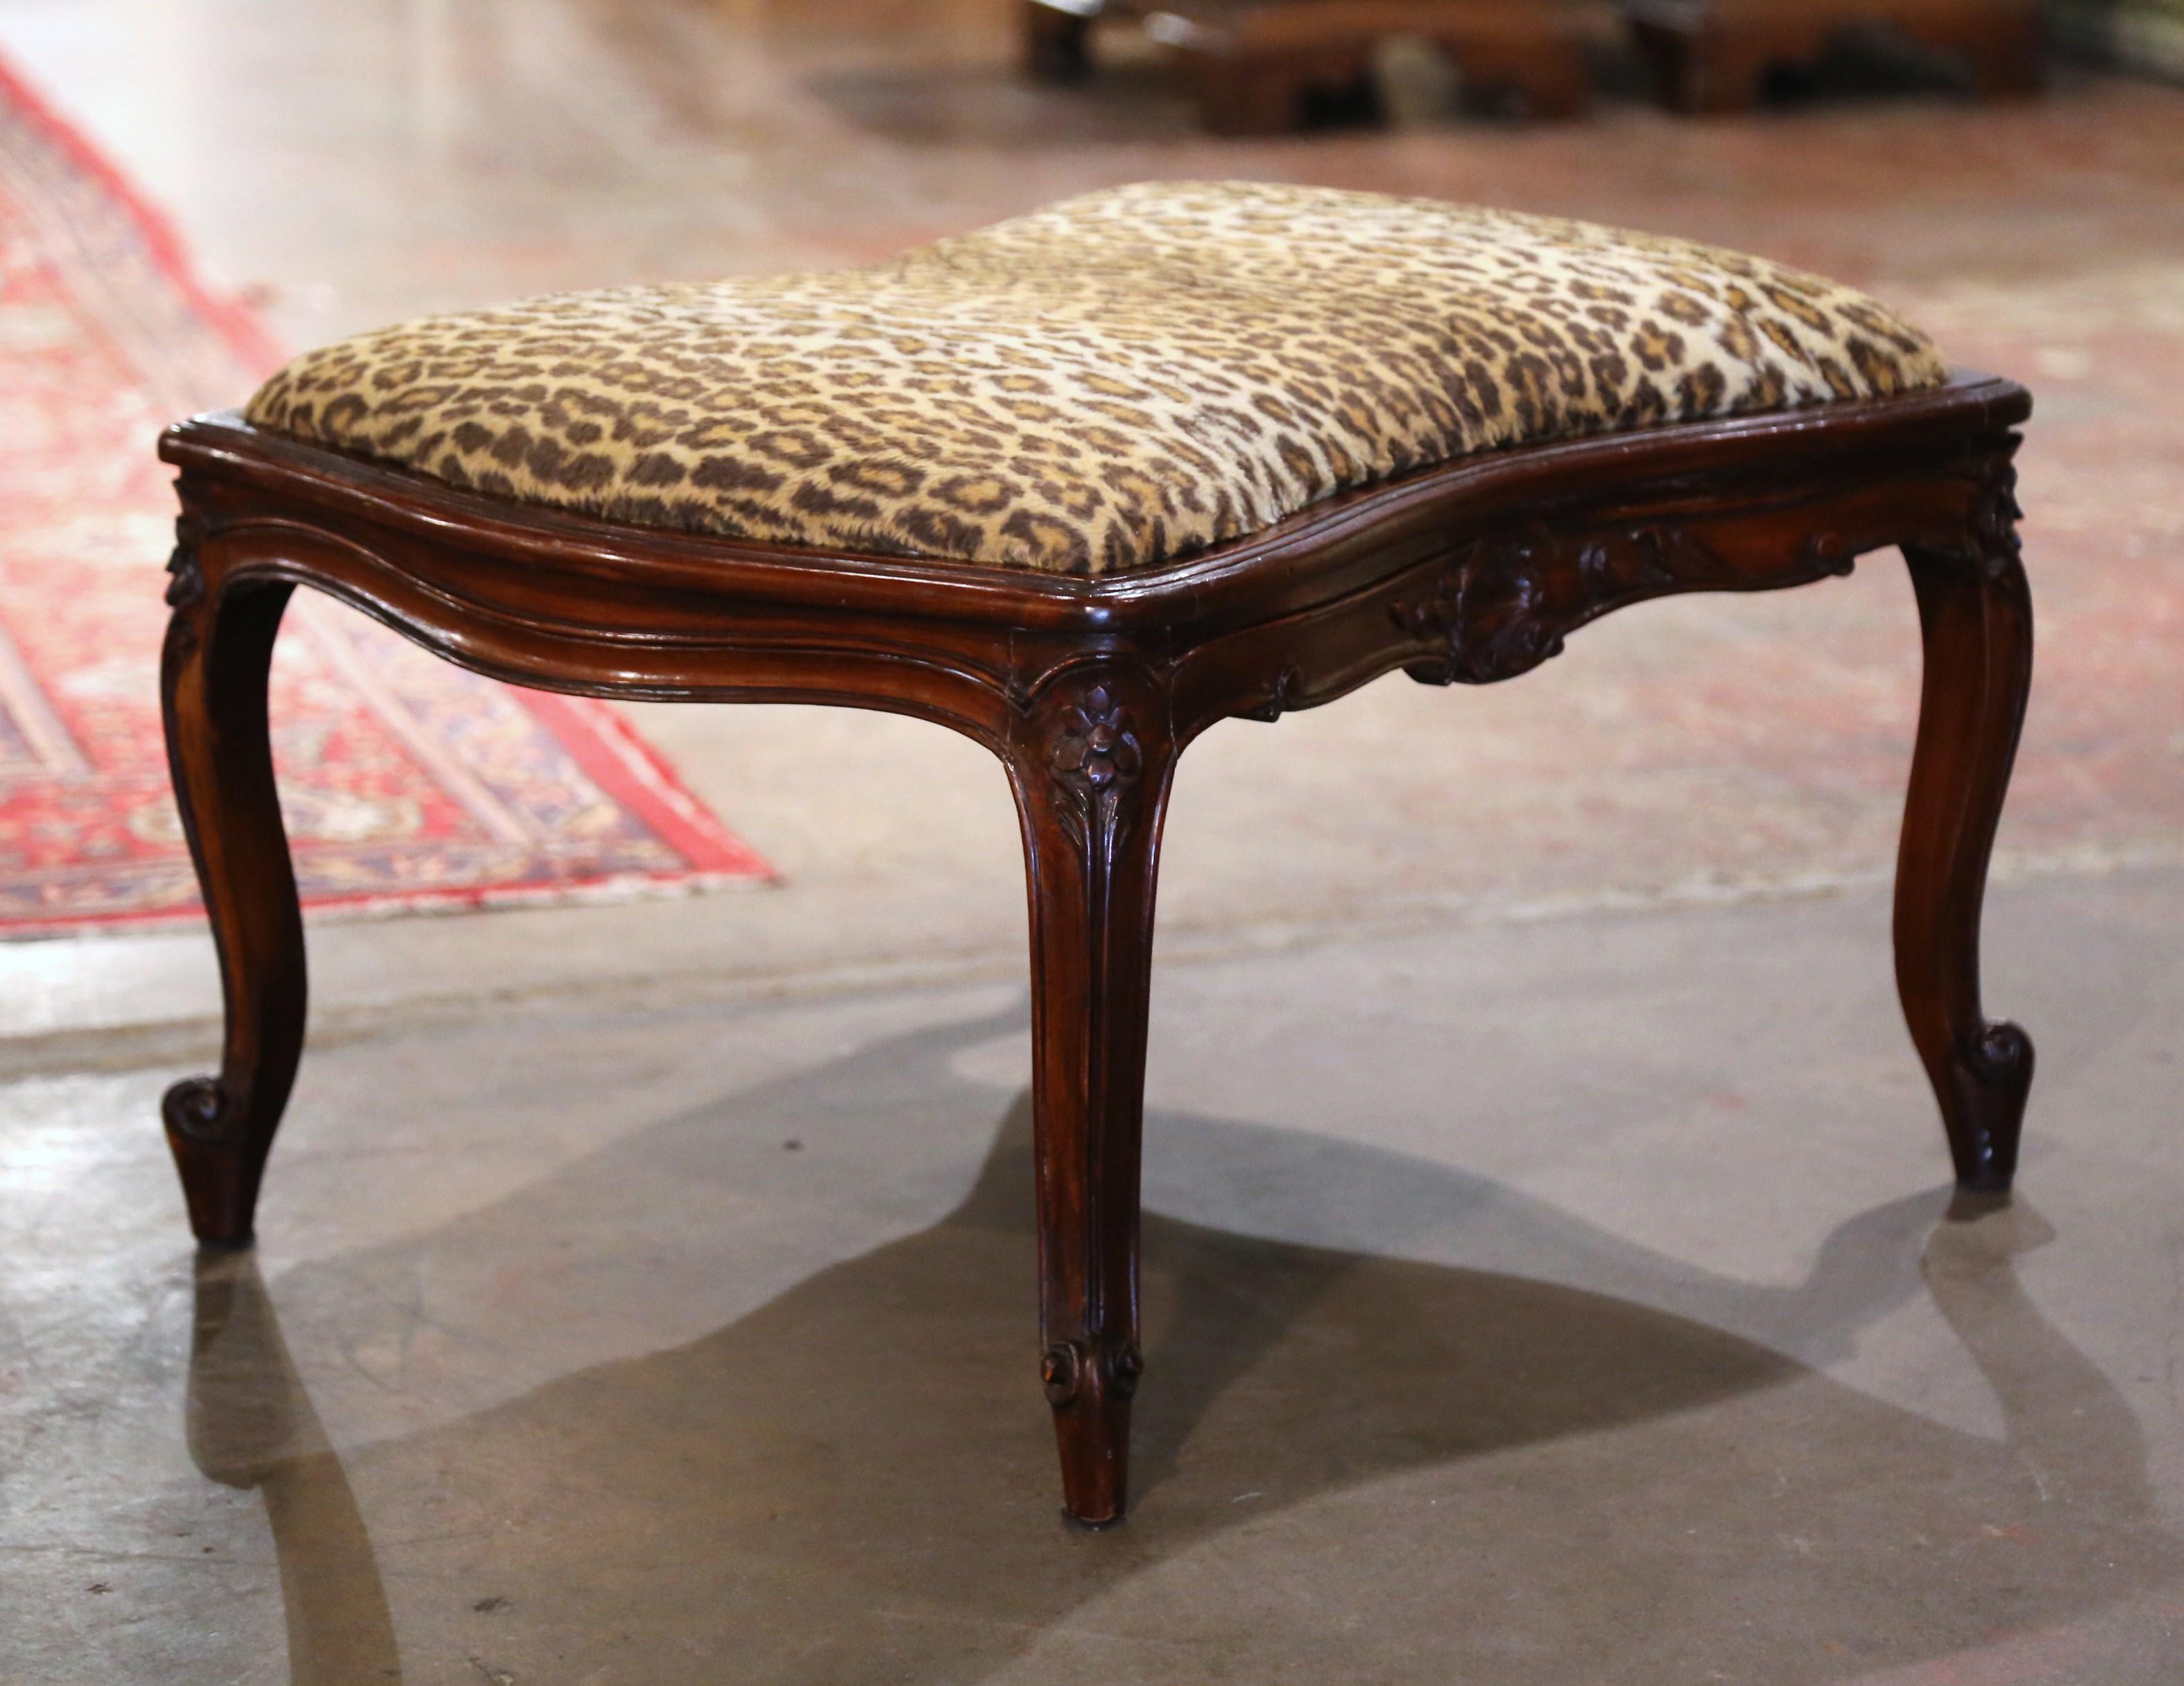 Place this antique stool bench in your den for extra seating. Crafted in Provence, Southern France, circa 1920 and rectangular in shape, the traditional fruit wood seating stands on elegant cabriole legs ending with escargot feet and decorated with